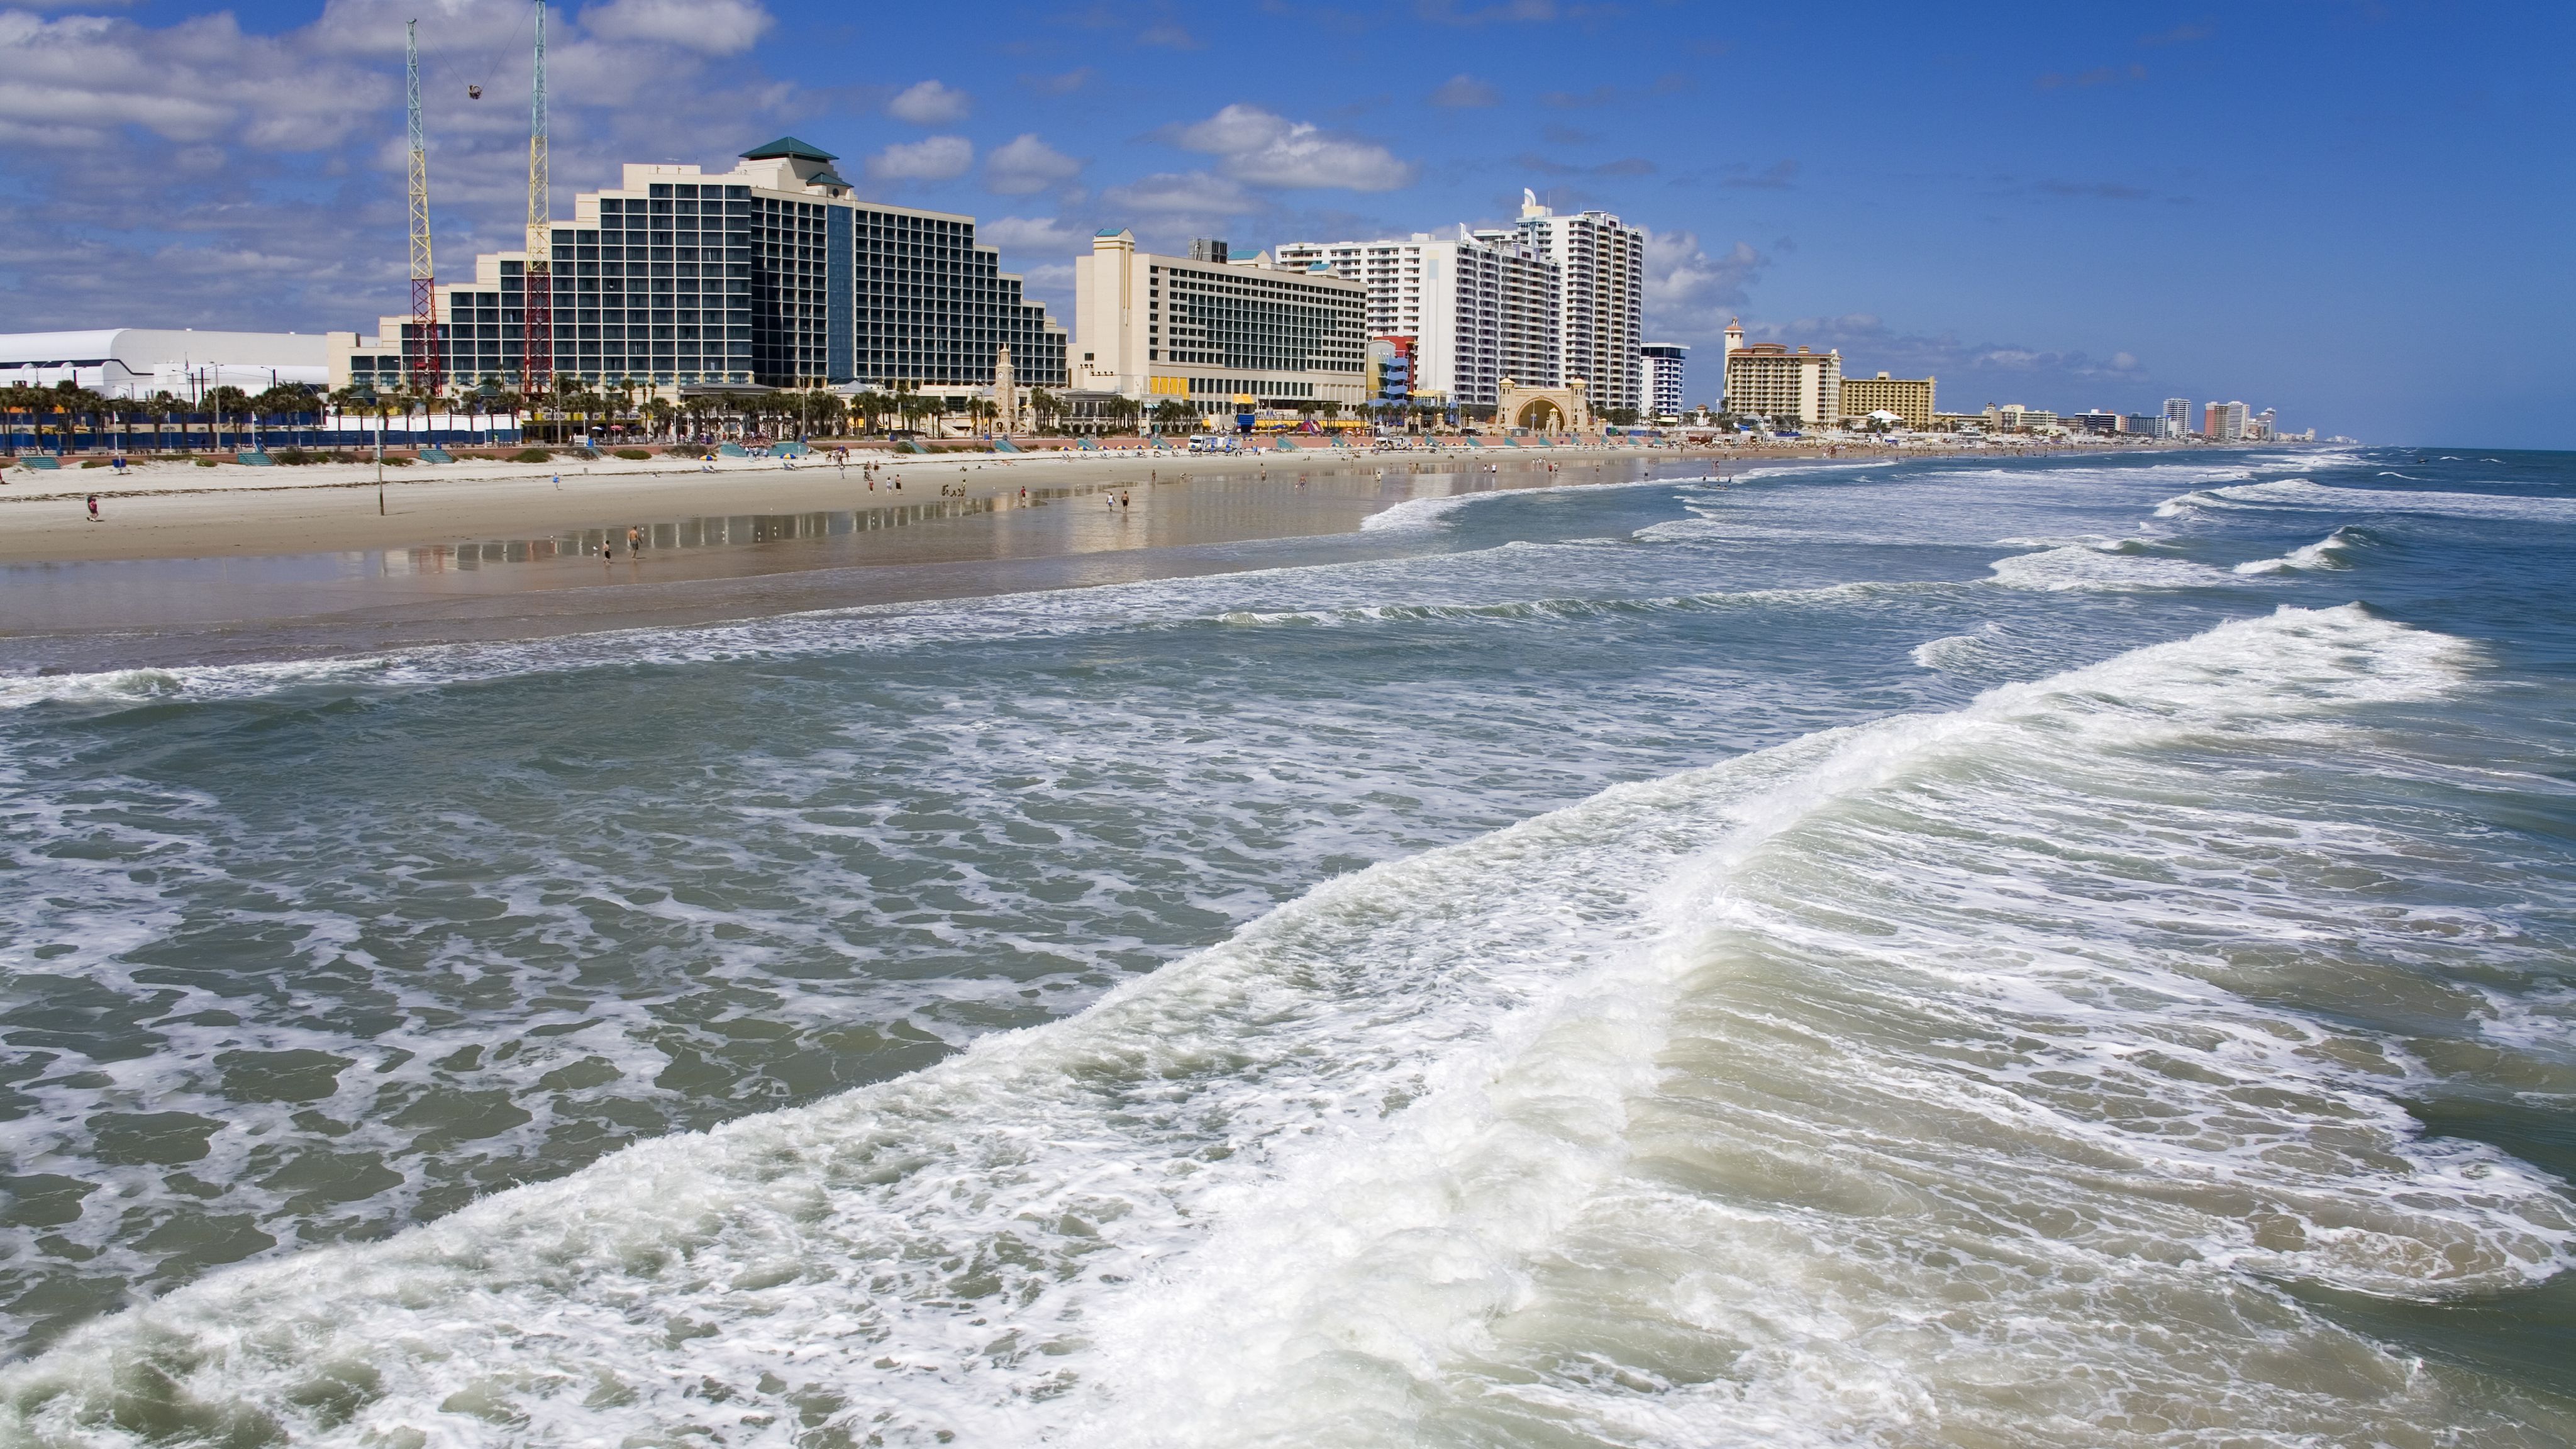 The Weather and Climate in Daytona Beach, Florida